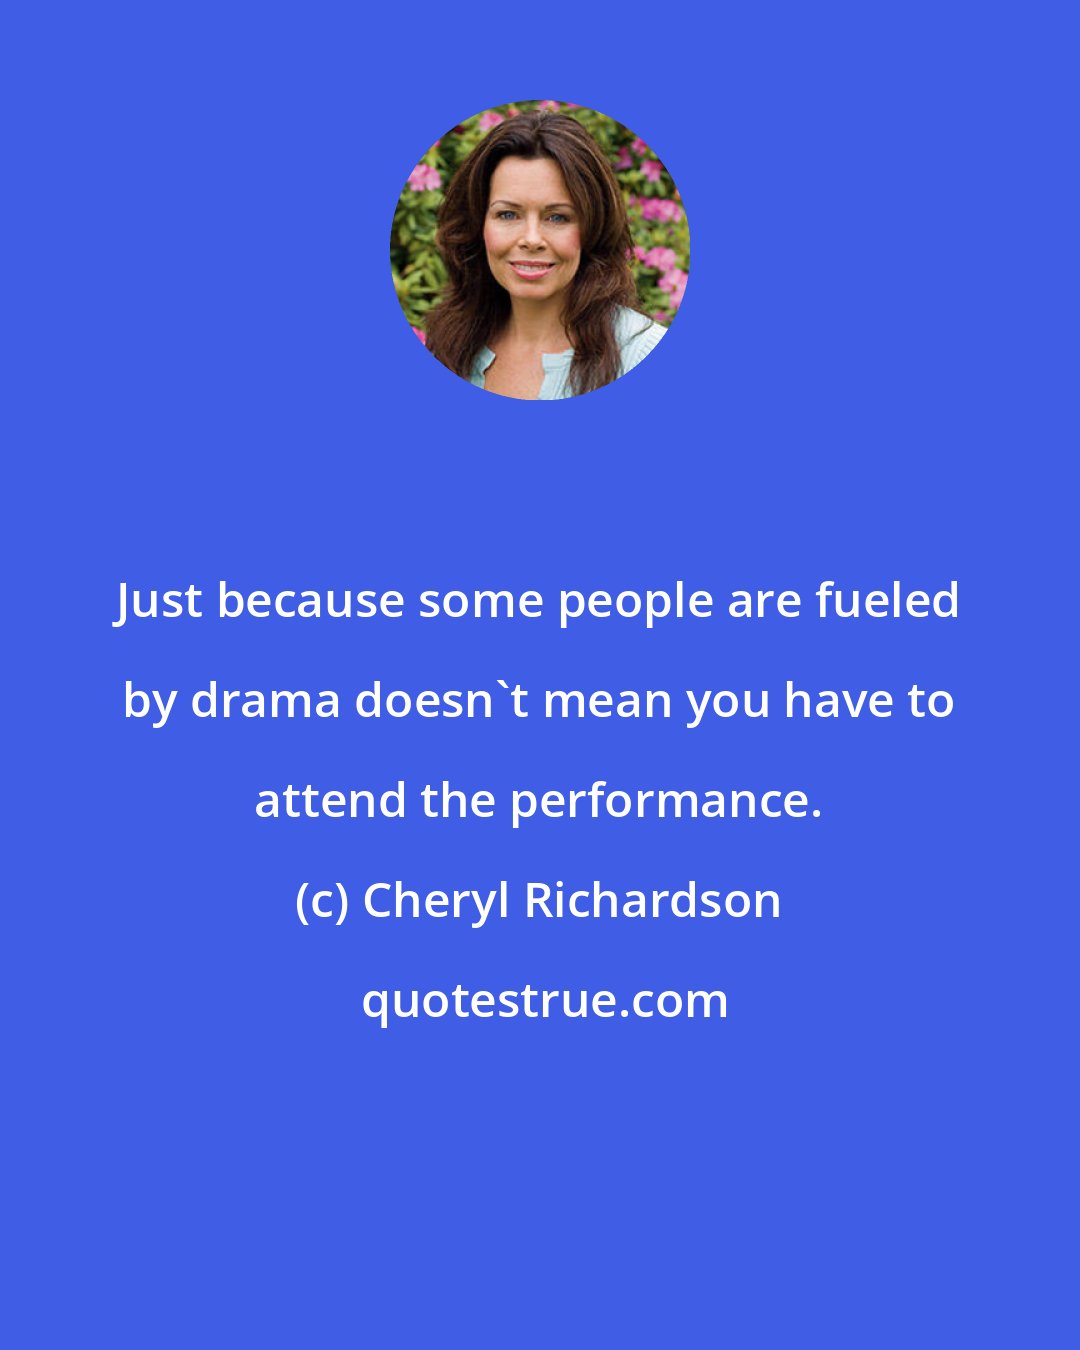 Cheryl Richardson: Just because some people are fueled by drama doesn't mean you have to attend the performance.